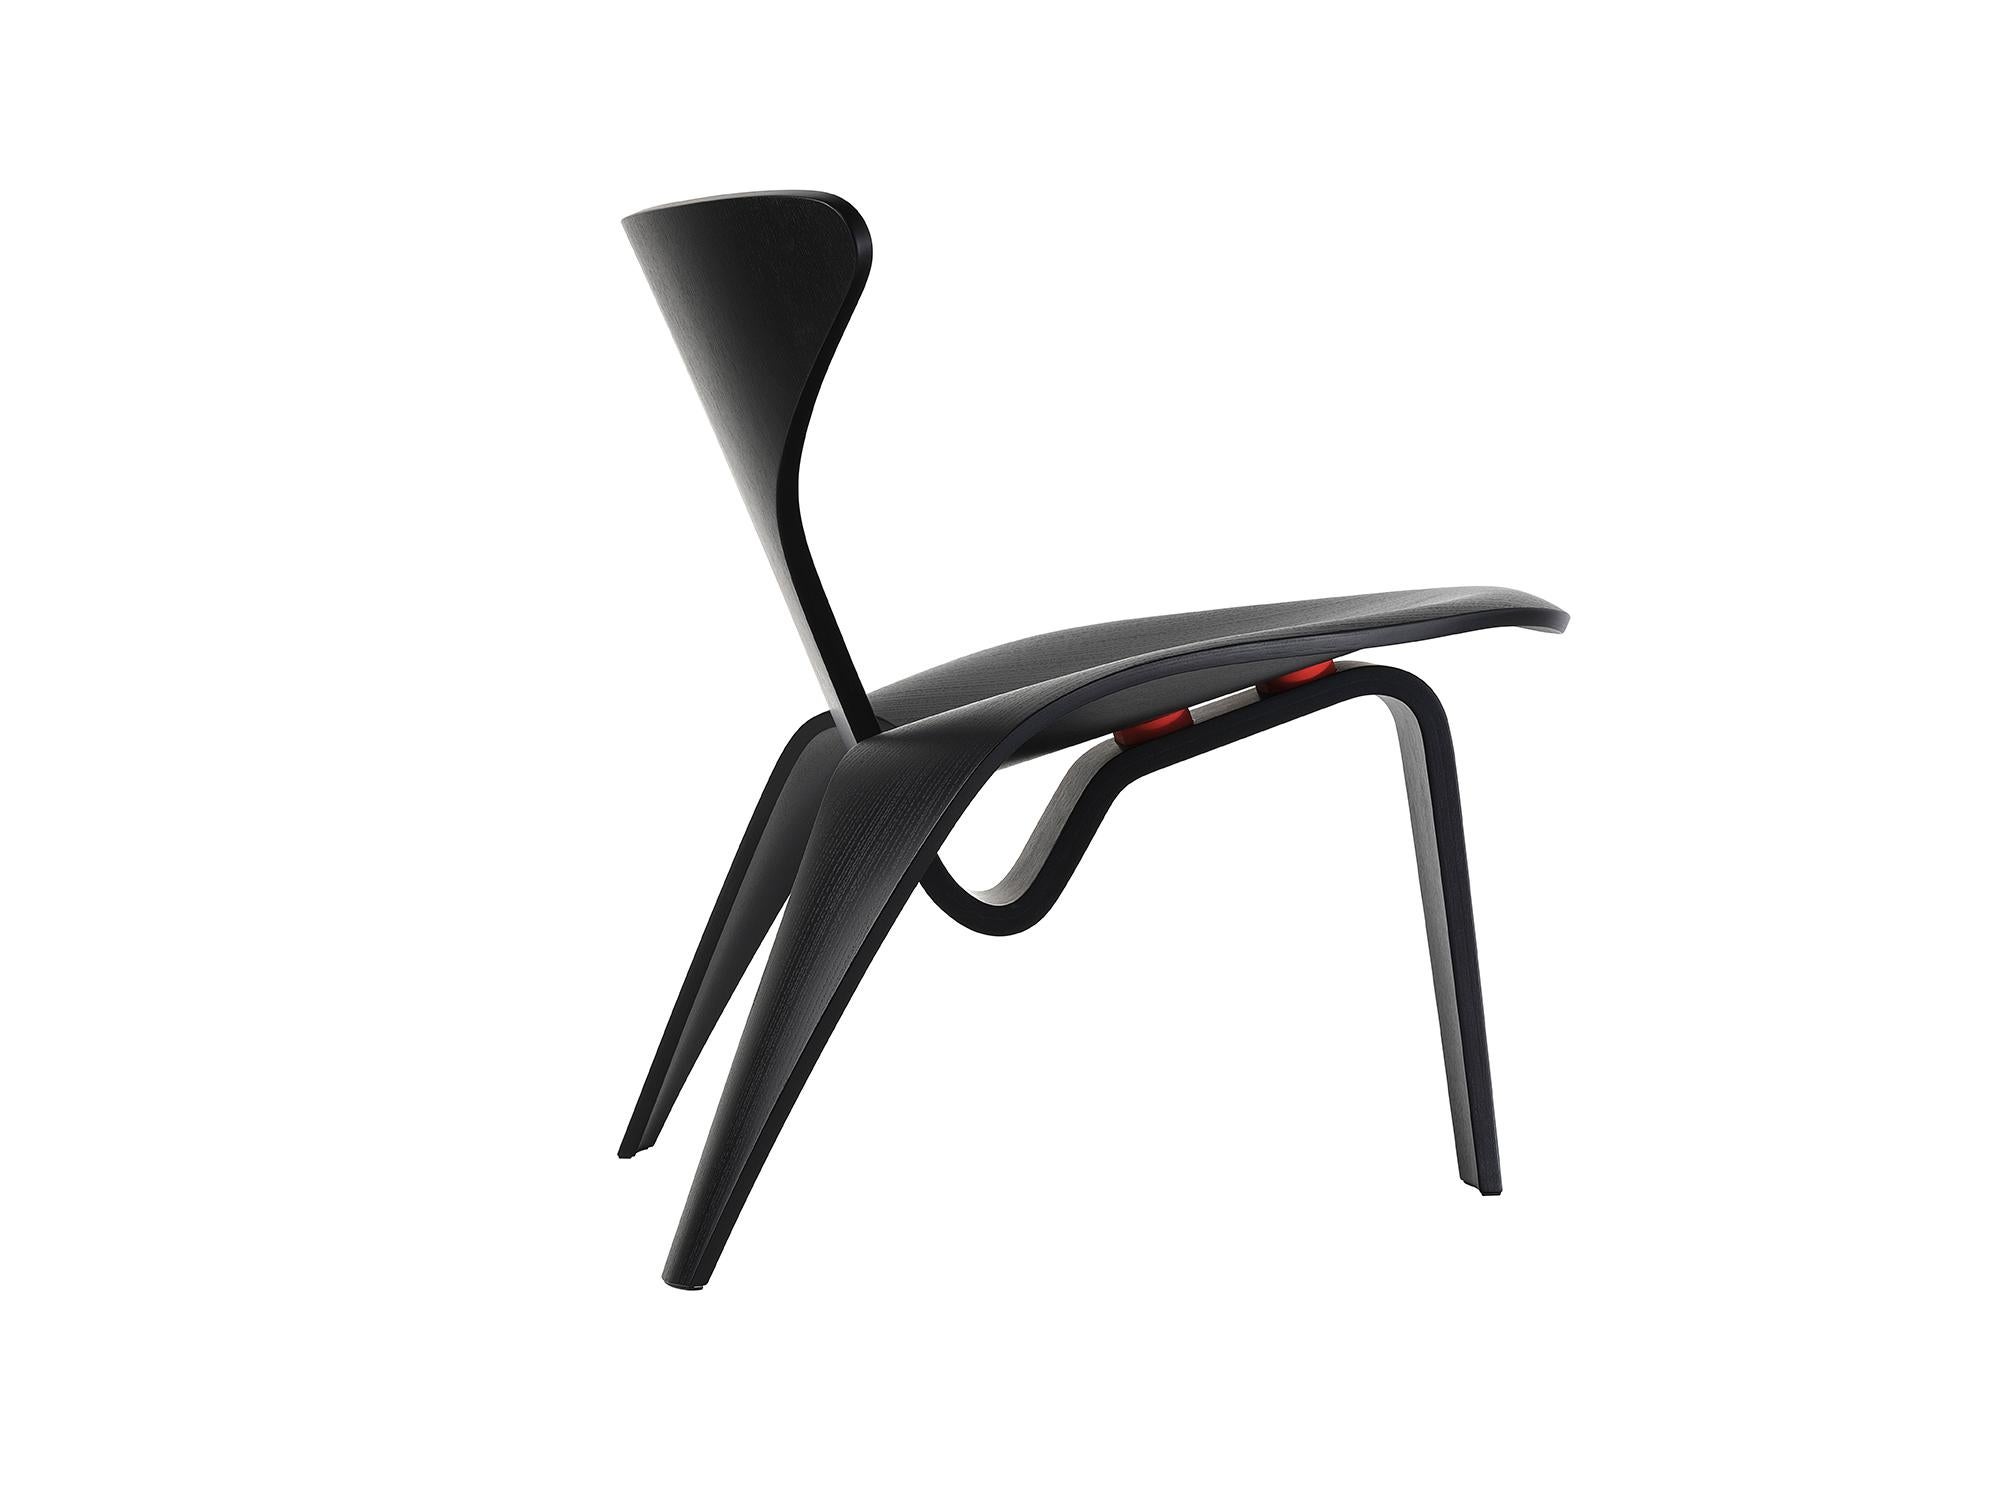 Poul Kjærholm 'PK0 A' Chair for Fritz Hansen in Black Colored Ash In New Condition For Sale In Glendale, CA